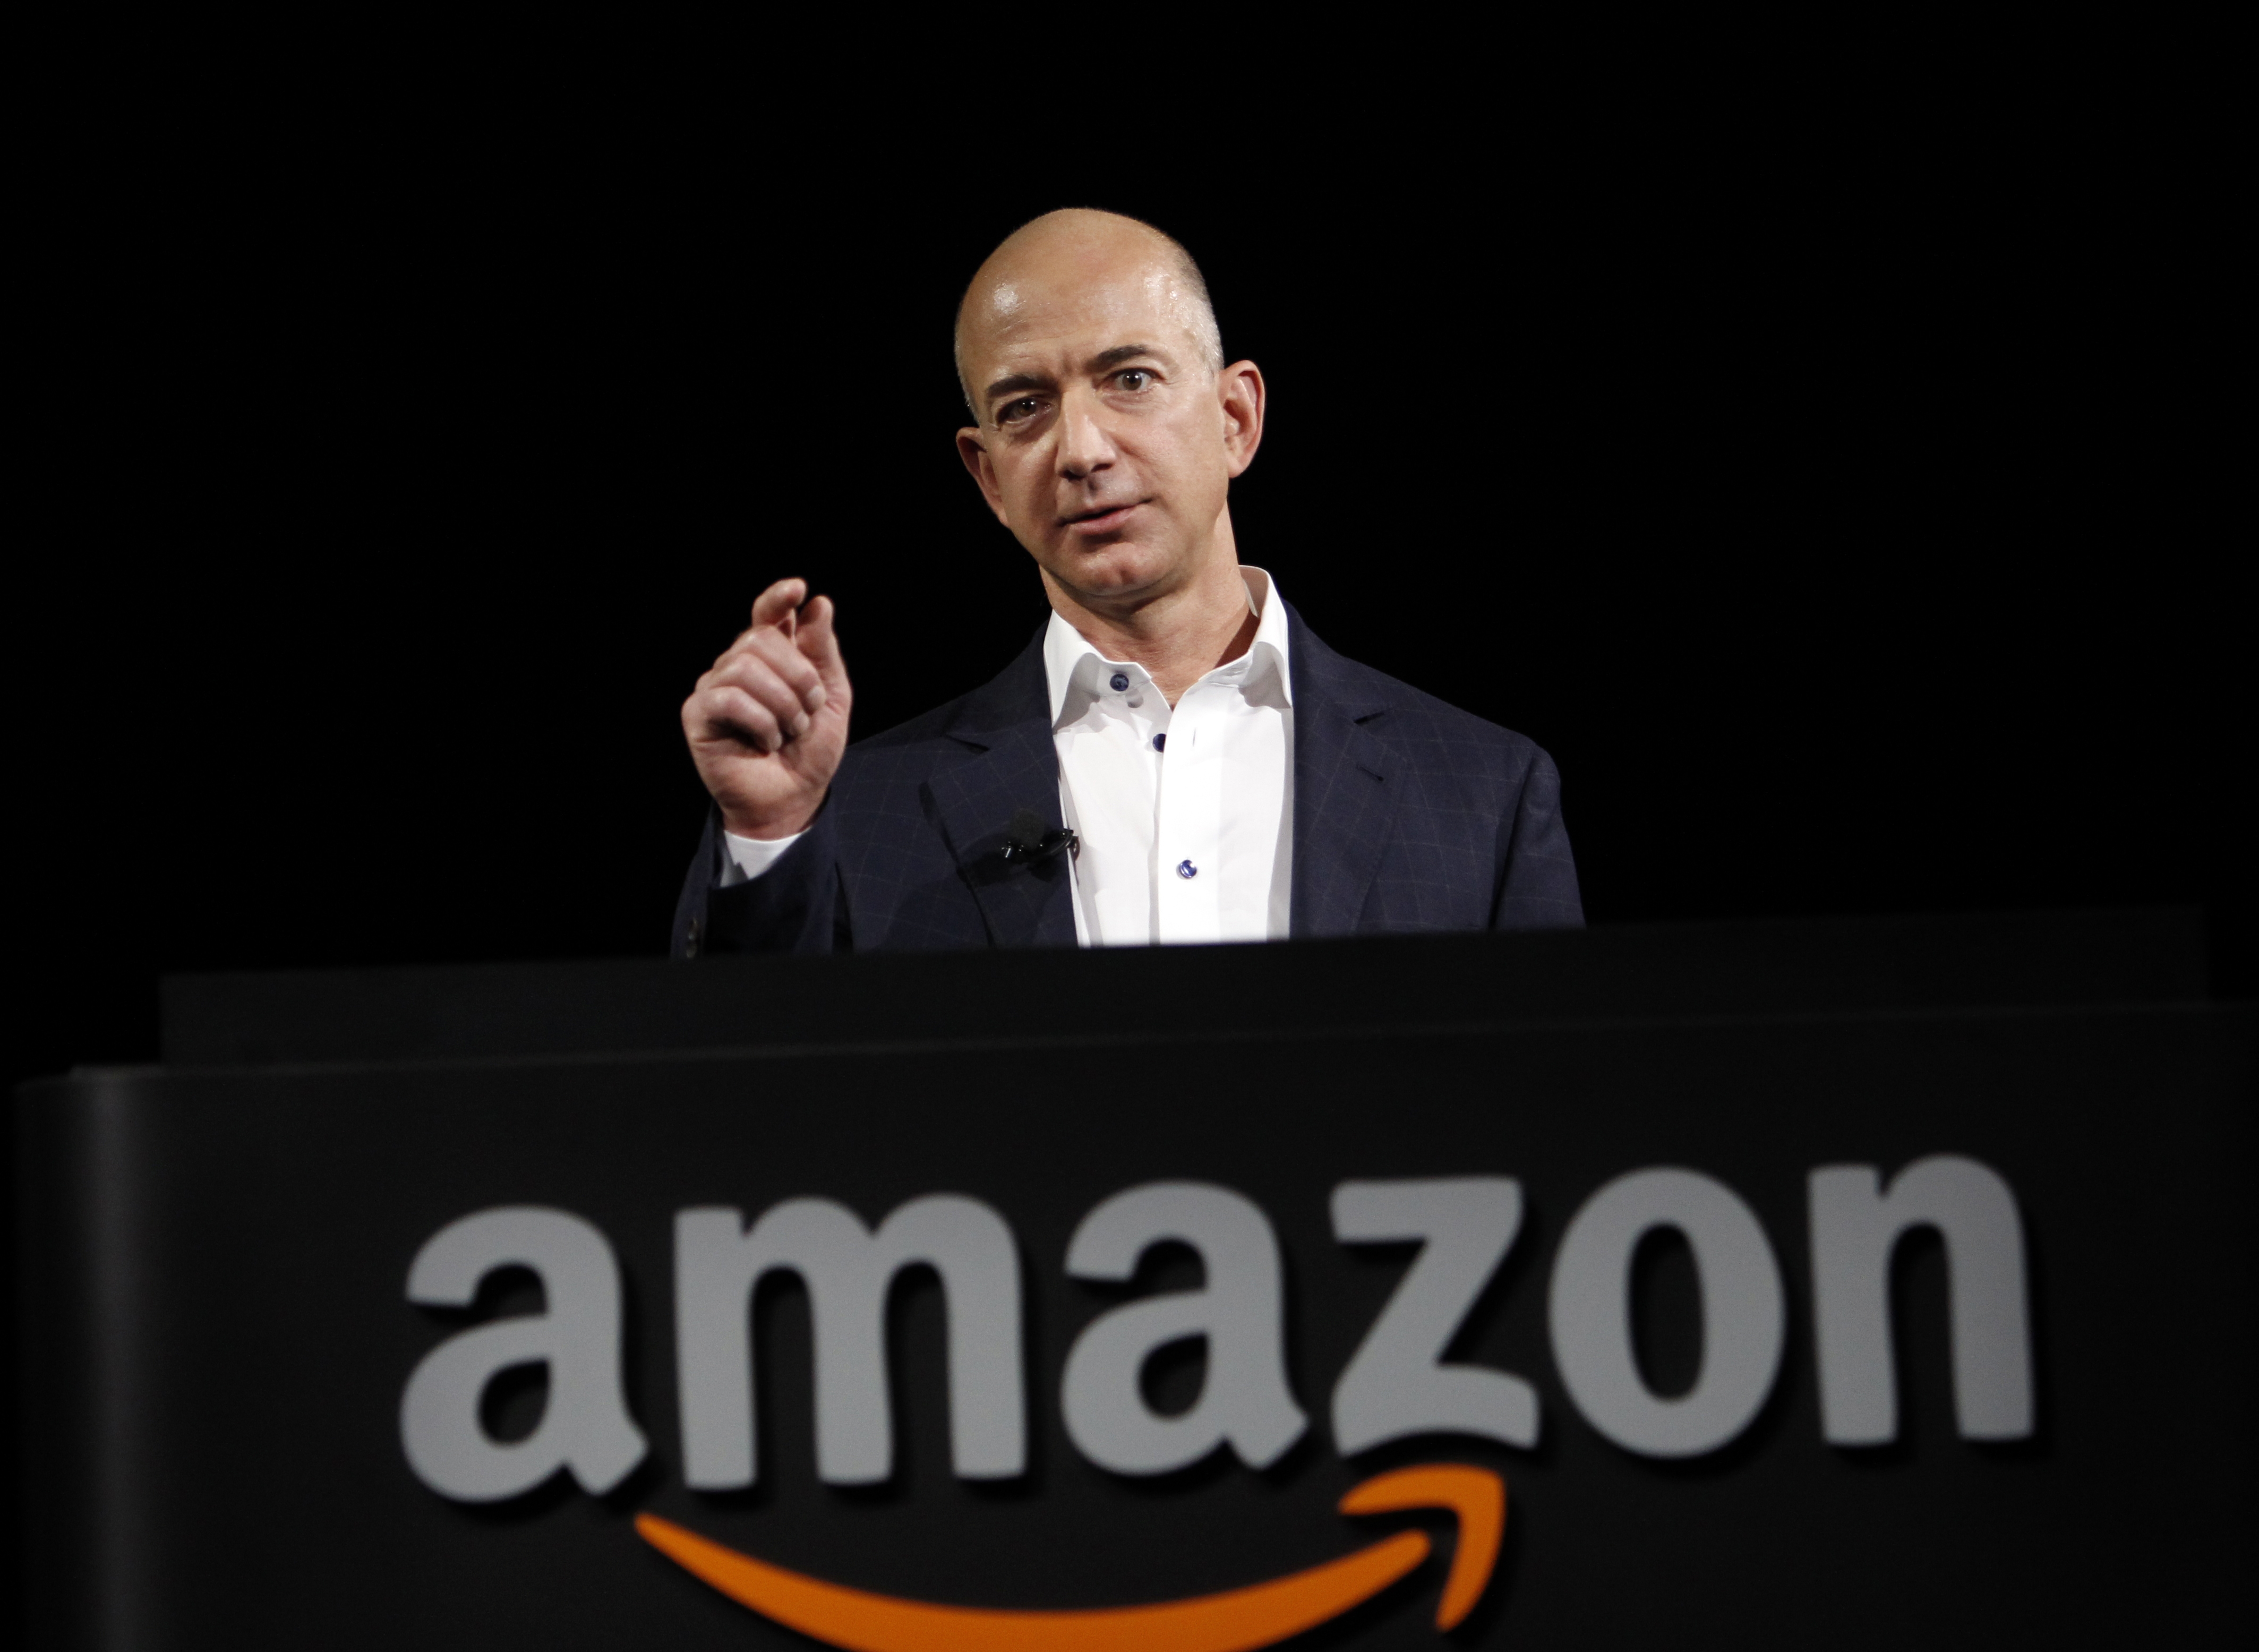 "Jeff Bezos walks into your office and says you can have a million dollars to launch your best entrepreneurial idea. what idea do you give him?"